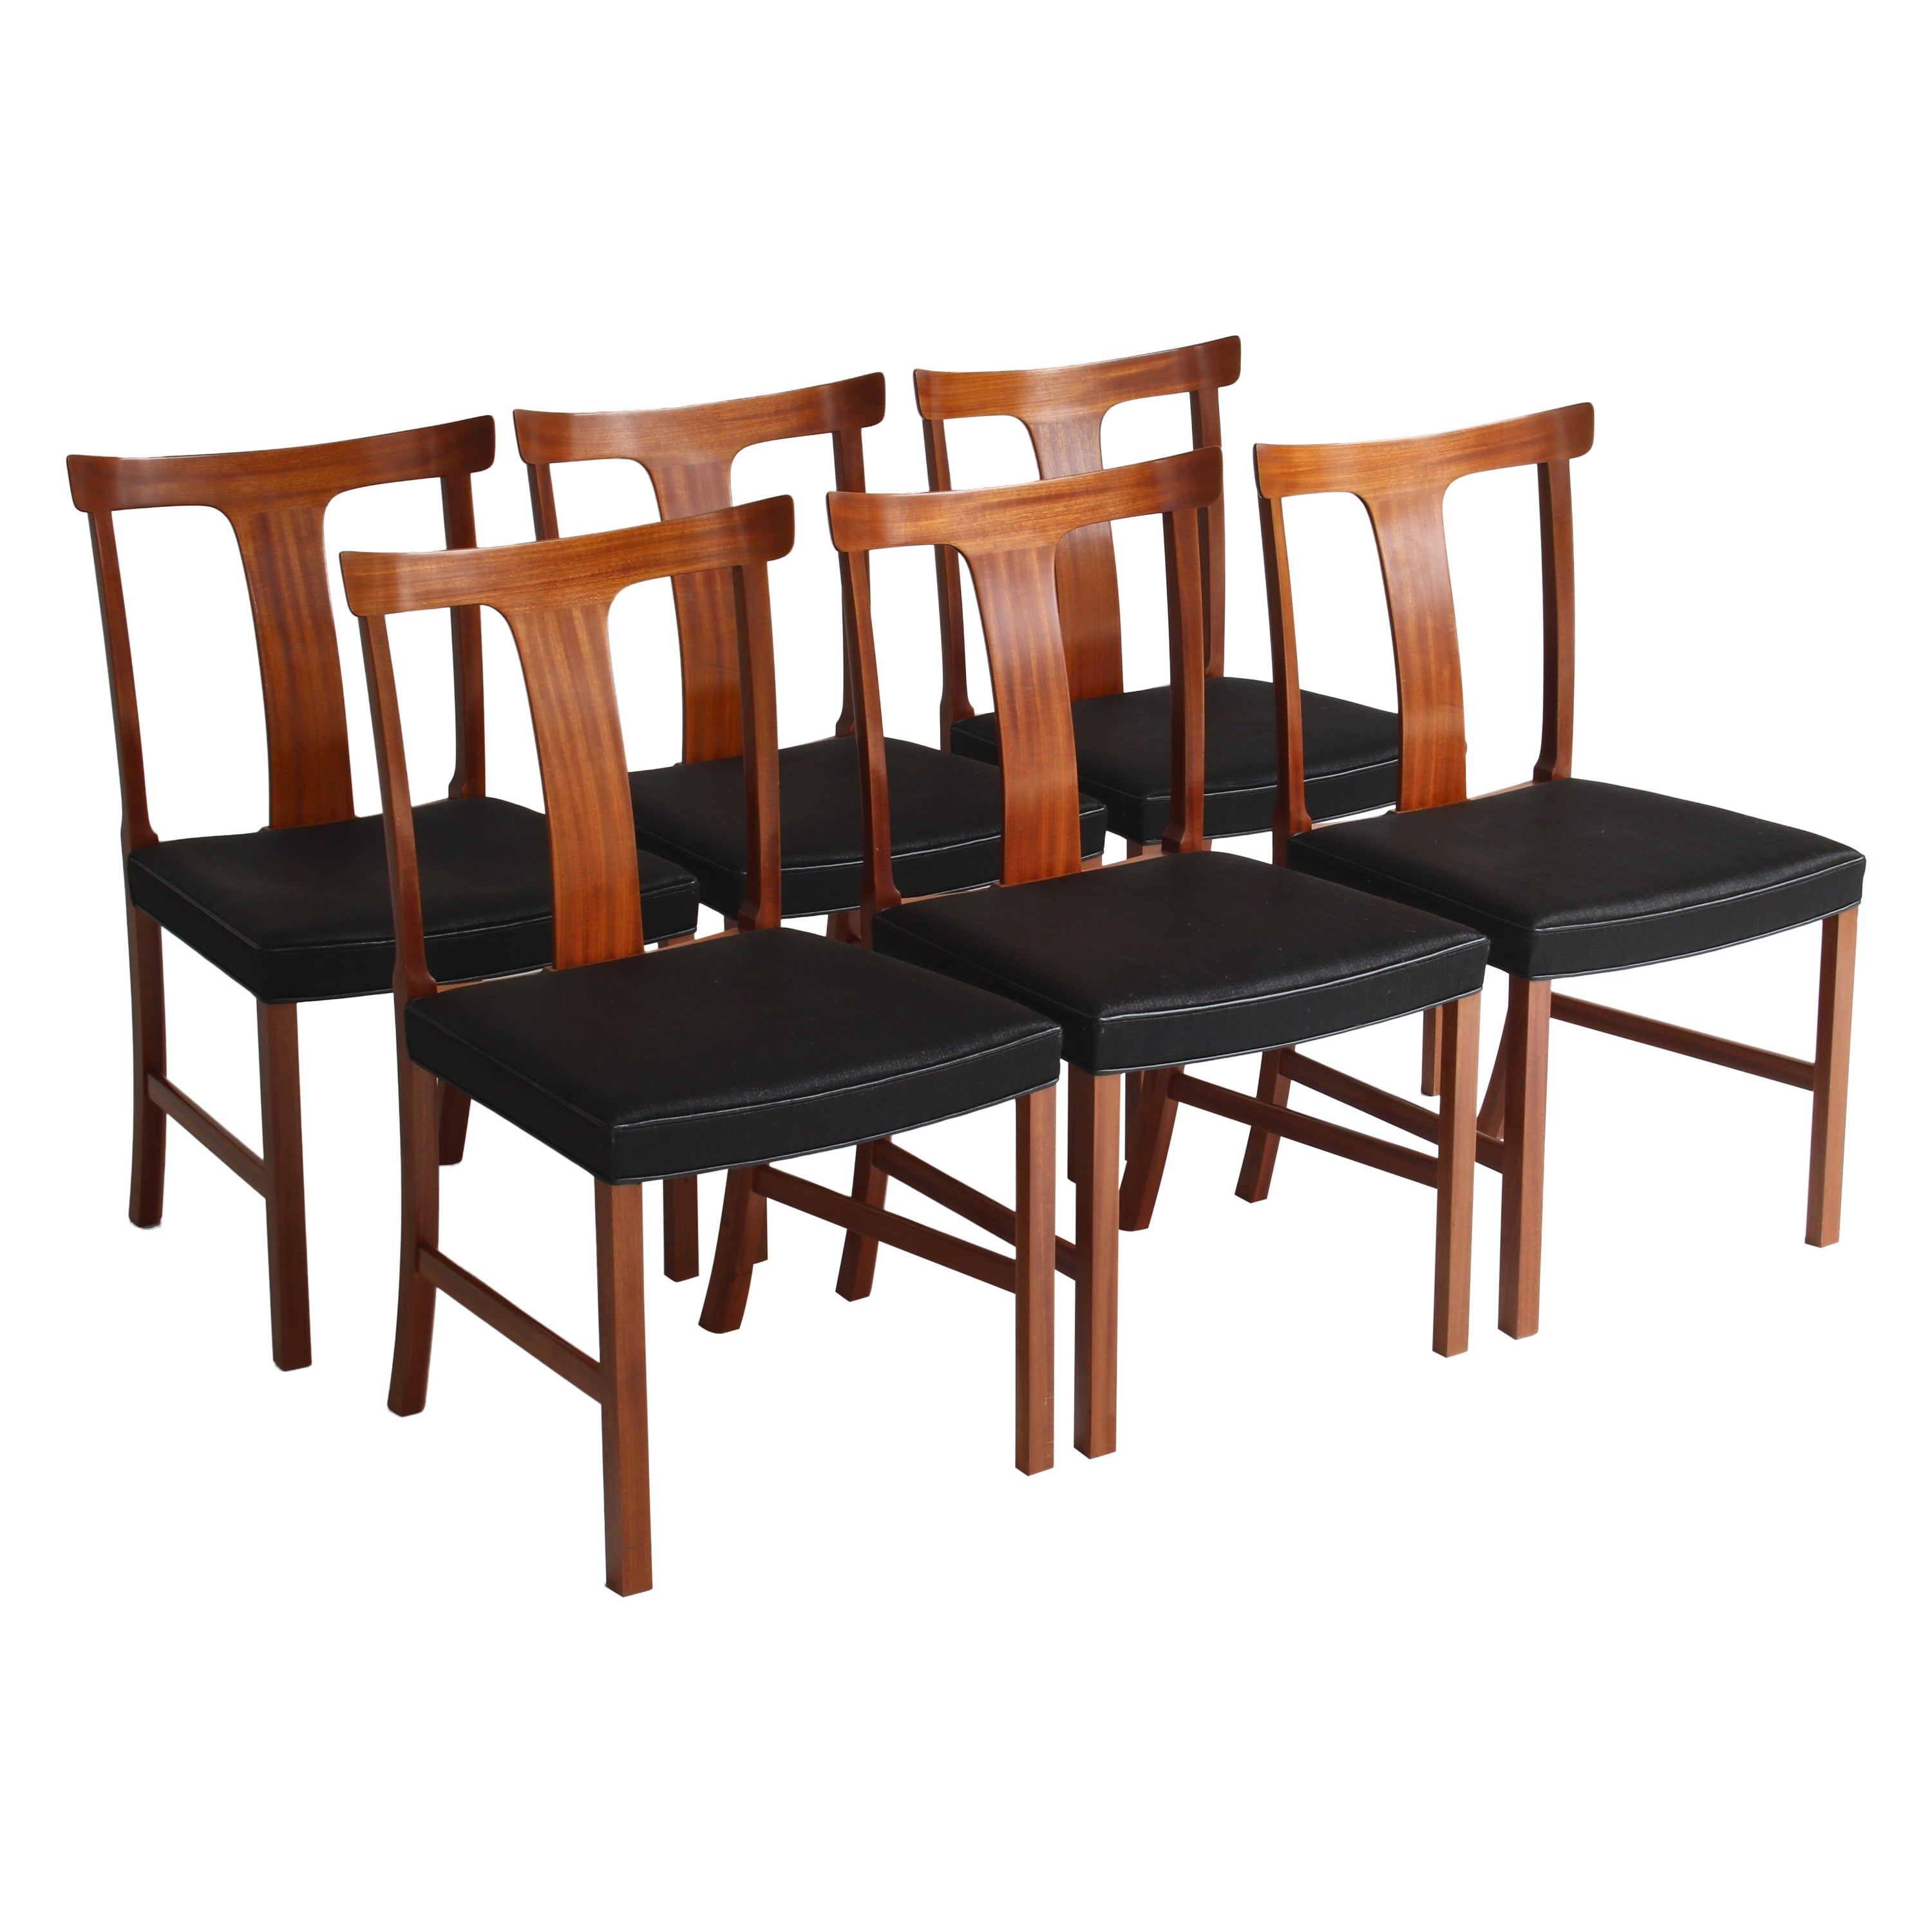 Ole Wanscher Dining Chairs in Mahogany and Horsehair Made by A.J. Iversen, 1960s For Sale